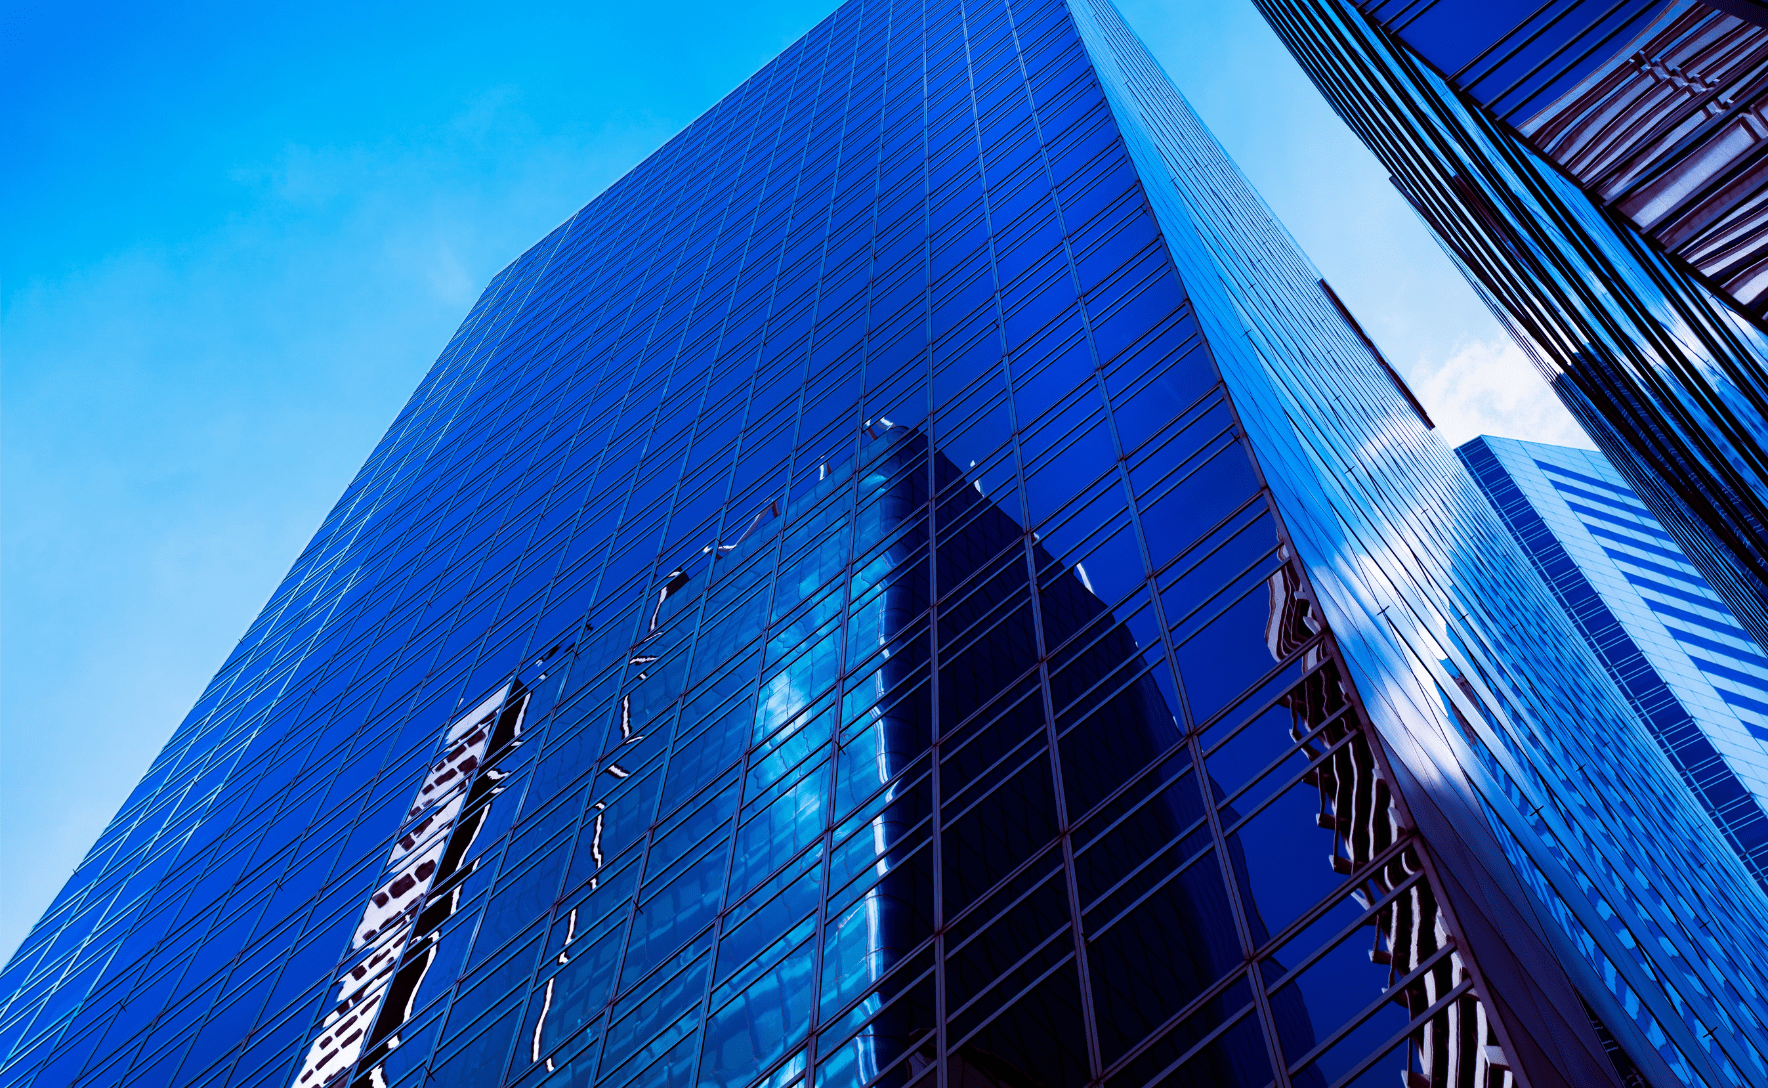 A glass skyscraper building, viewed from an upward angle.